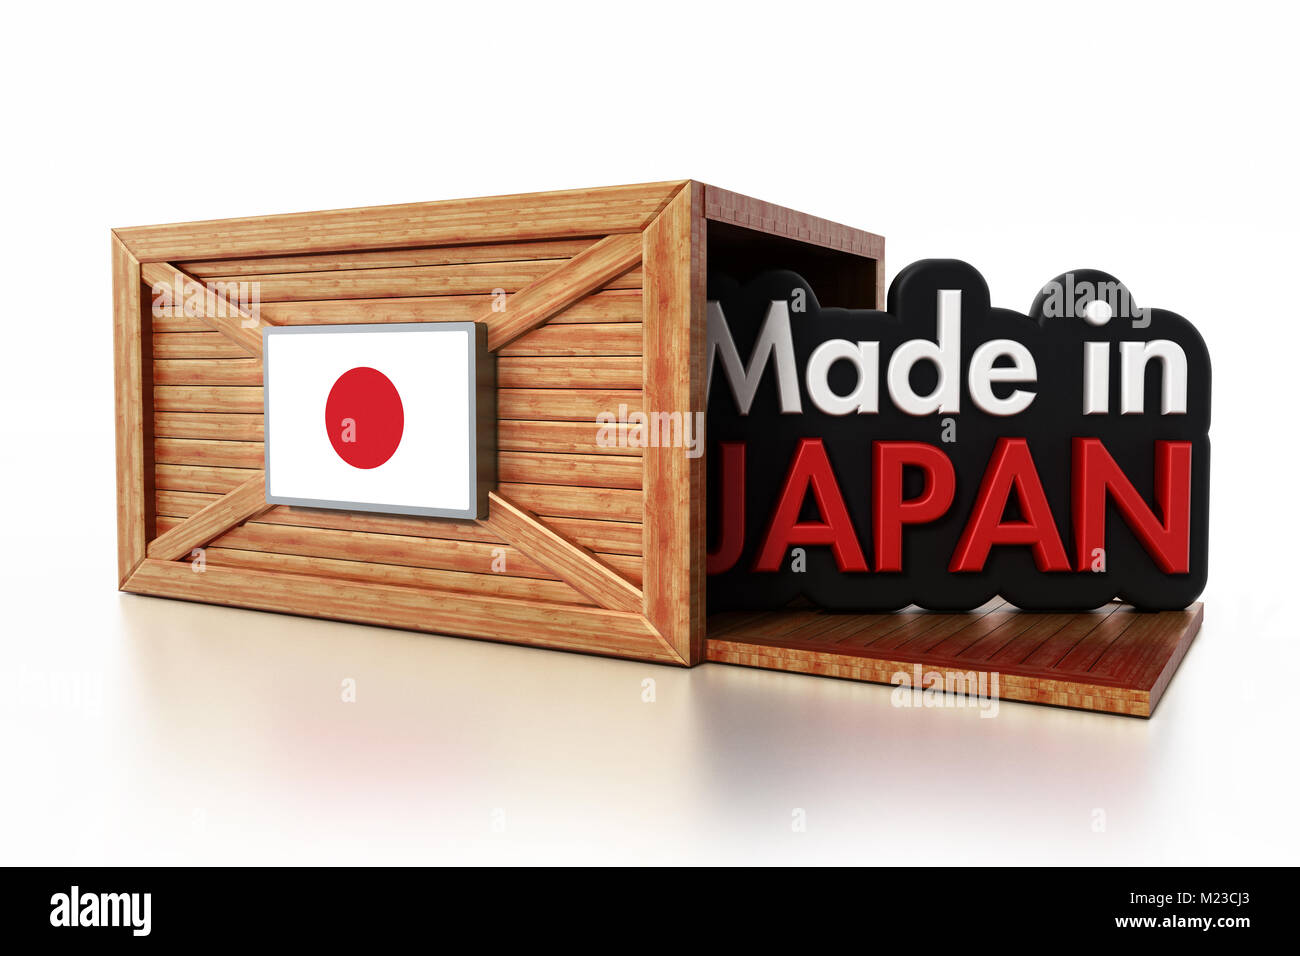 Made in Japan text inside cargo box with Japanese flag. 3D illustration. Stock Photo